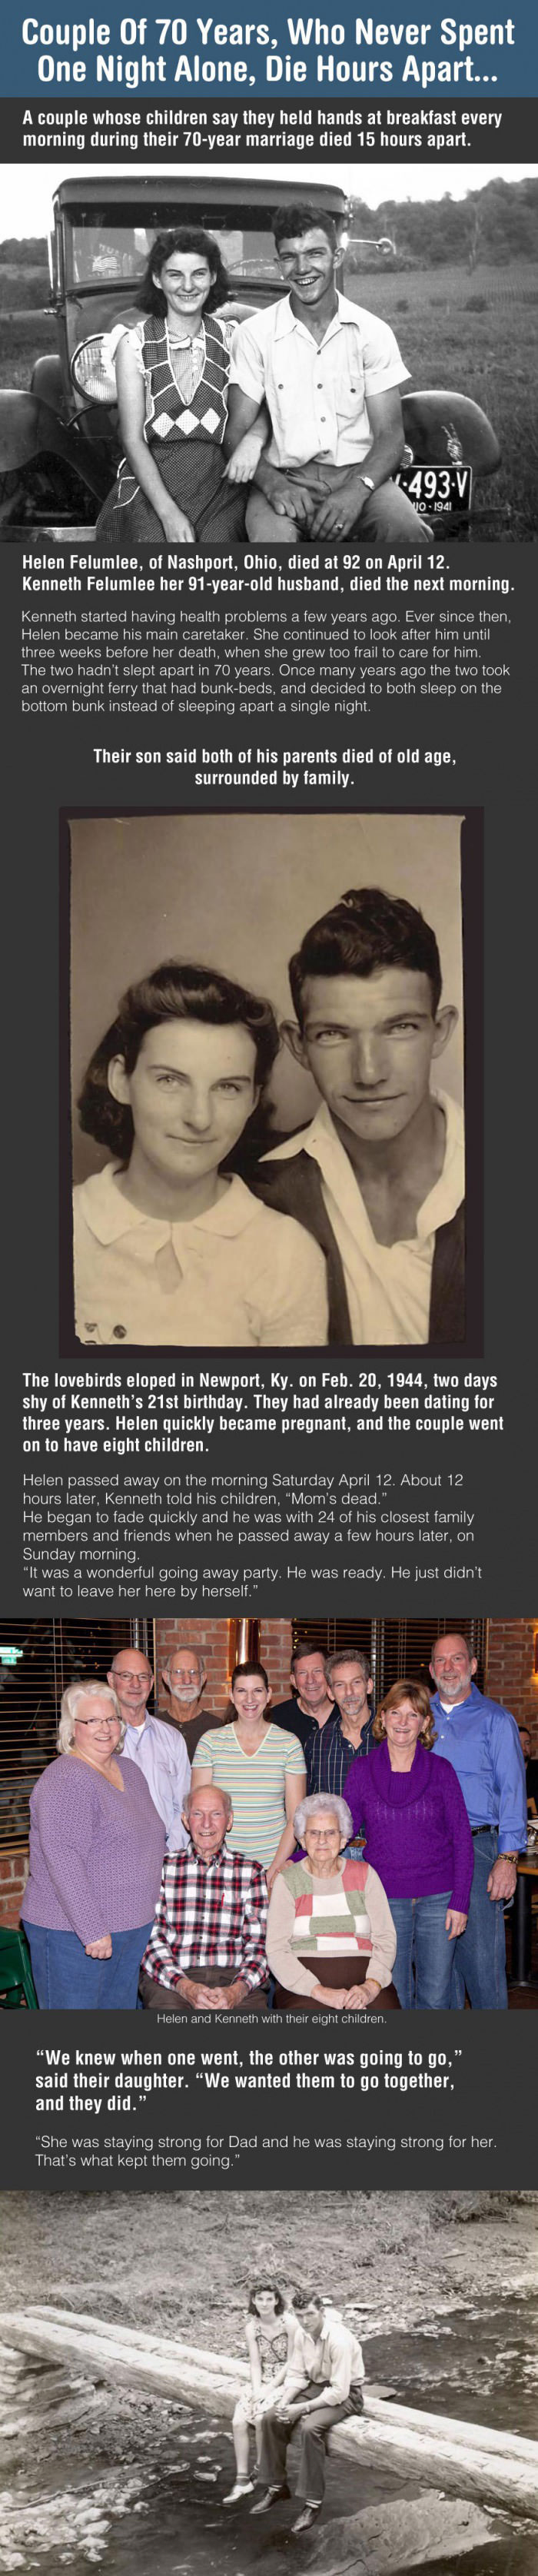 couple of 70 years who never spent one night alone die hours apart